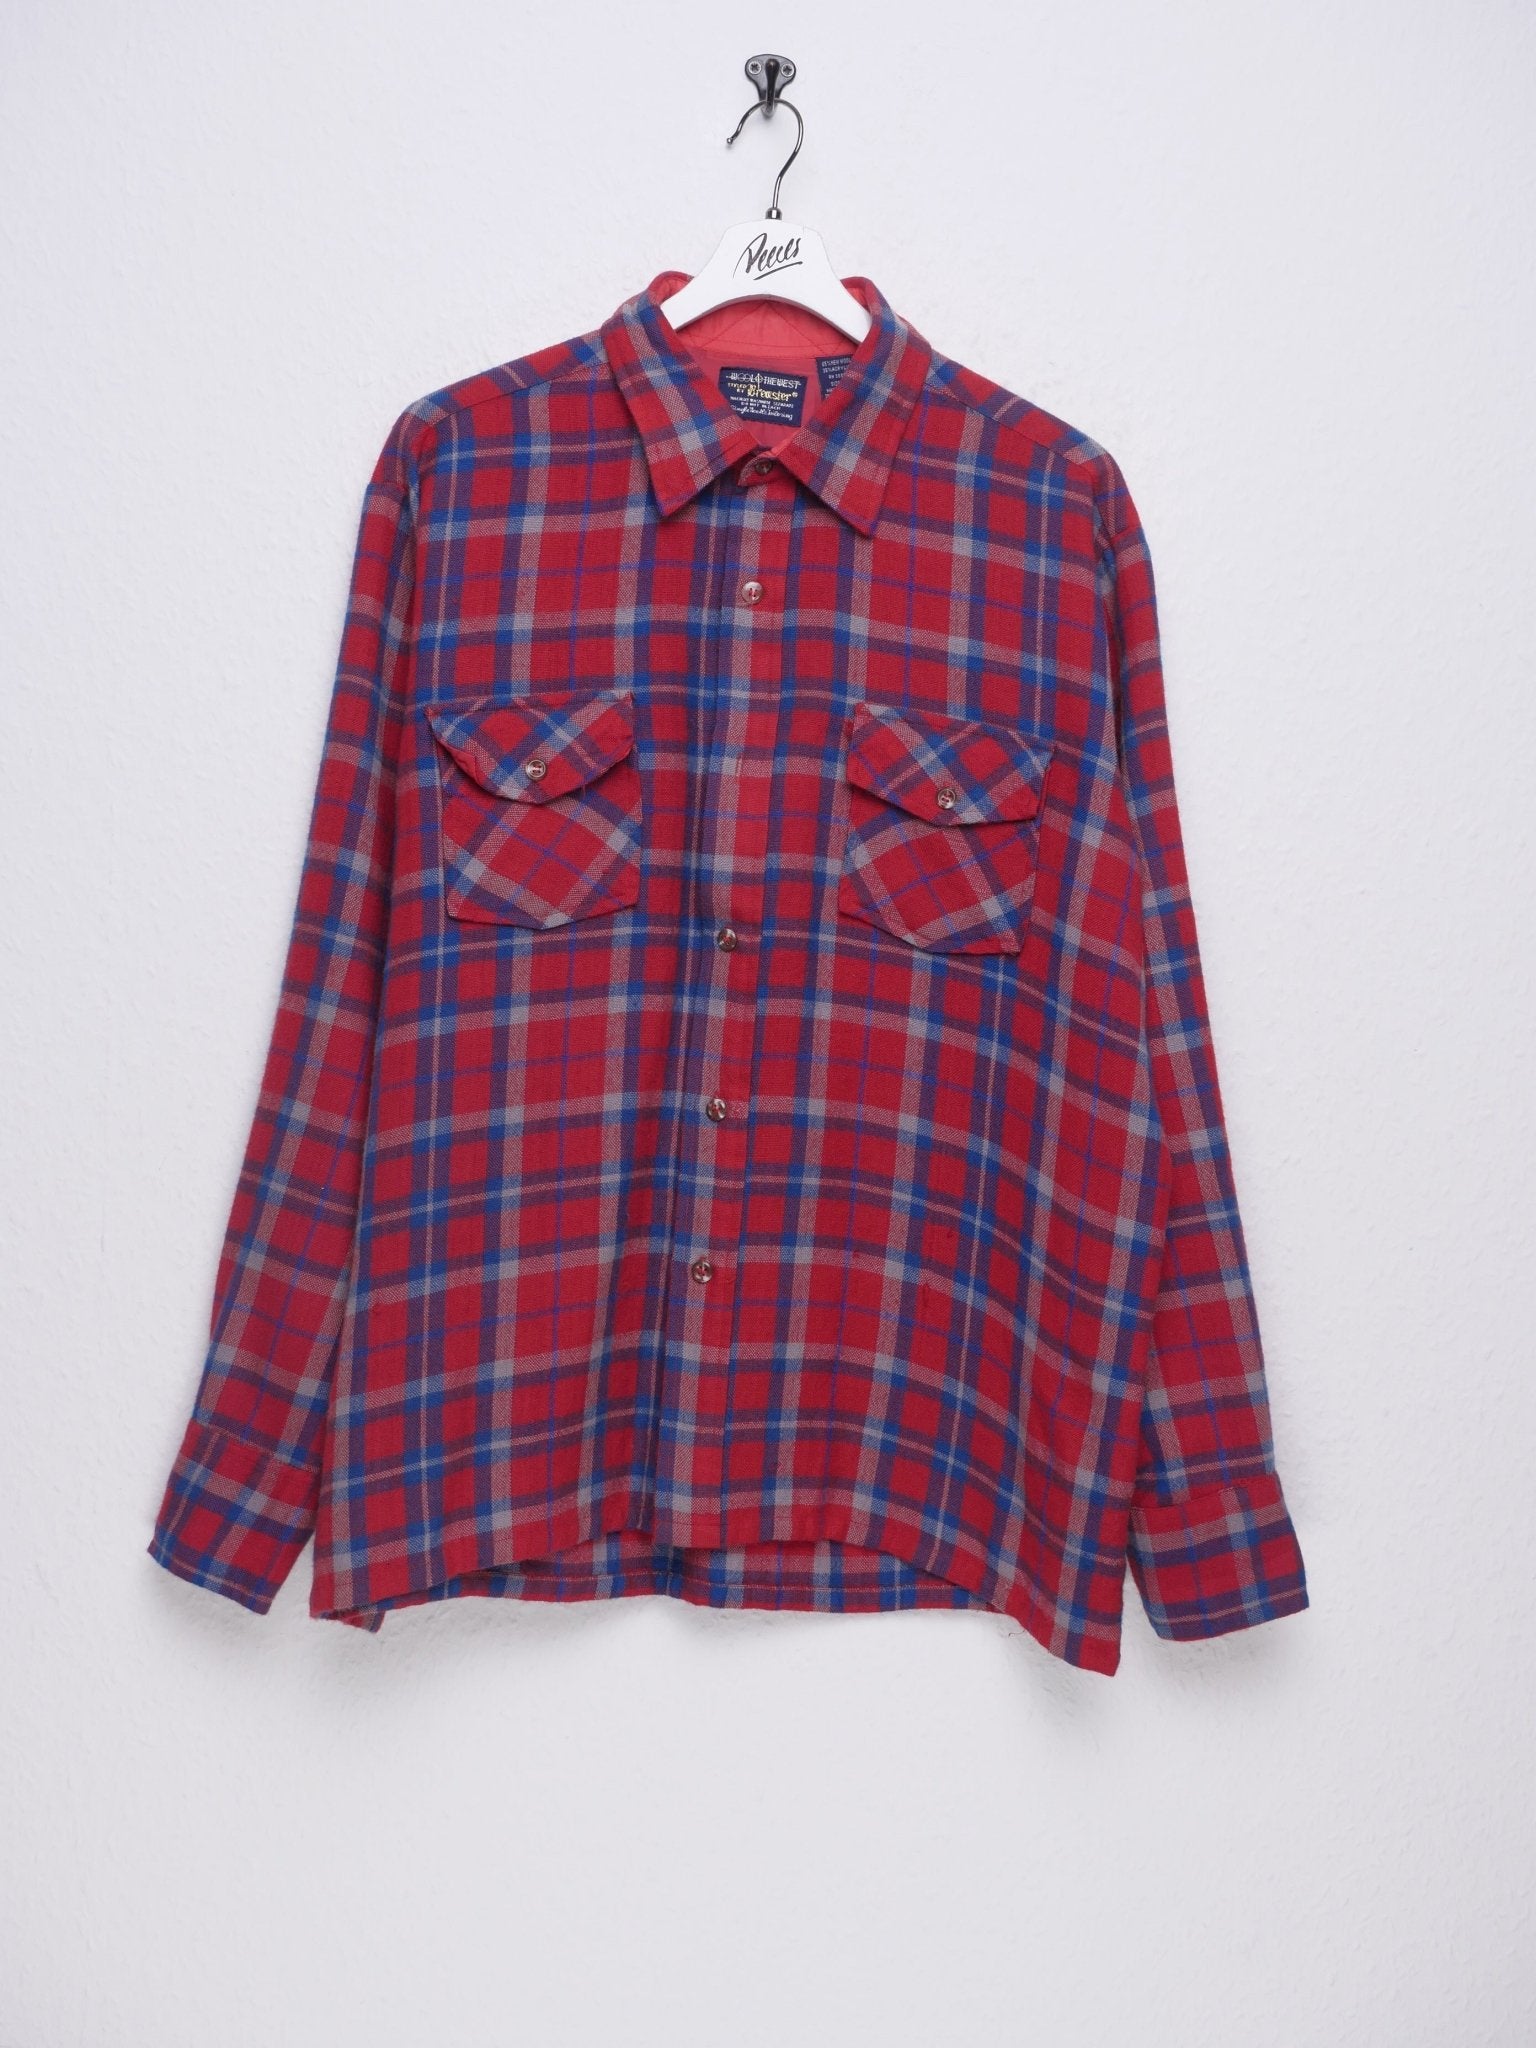 patterned thin Flannel Button Down Langarm Hemd - Peeces